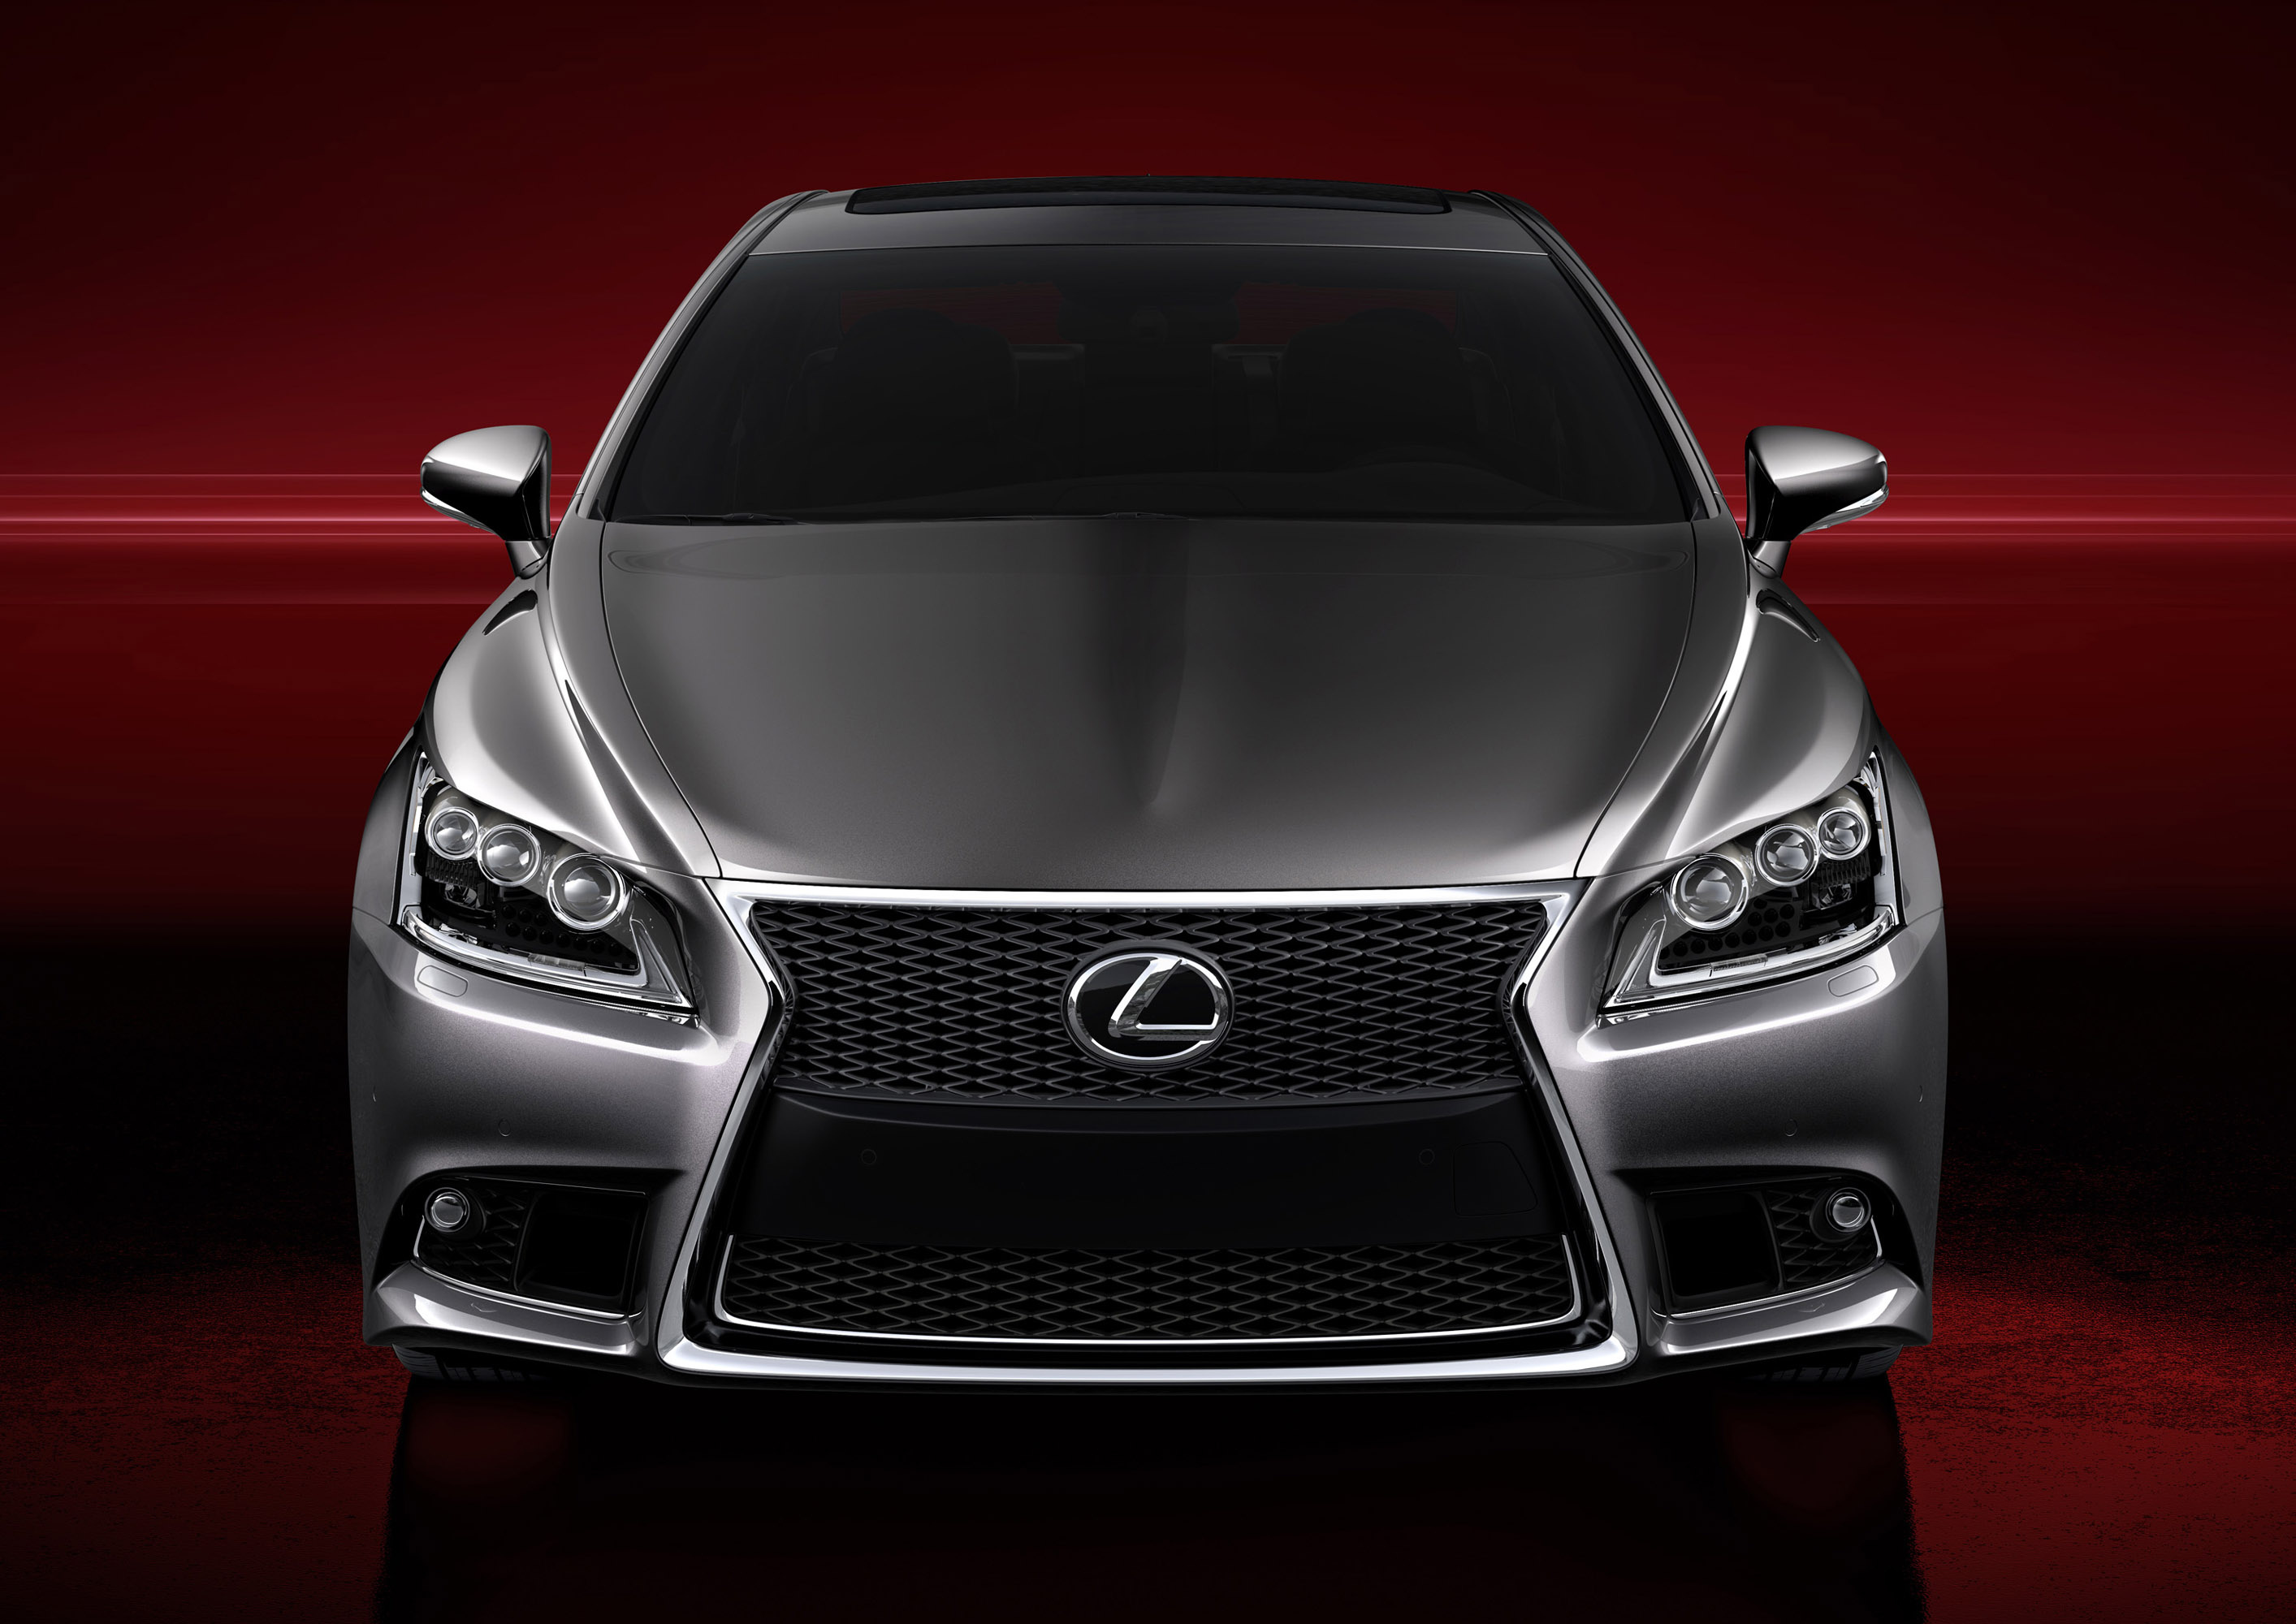 Lexus LS, F Sport edition, HD picture, Sporty and luxurious, 2830x2000 HD Desktop